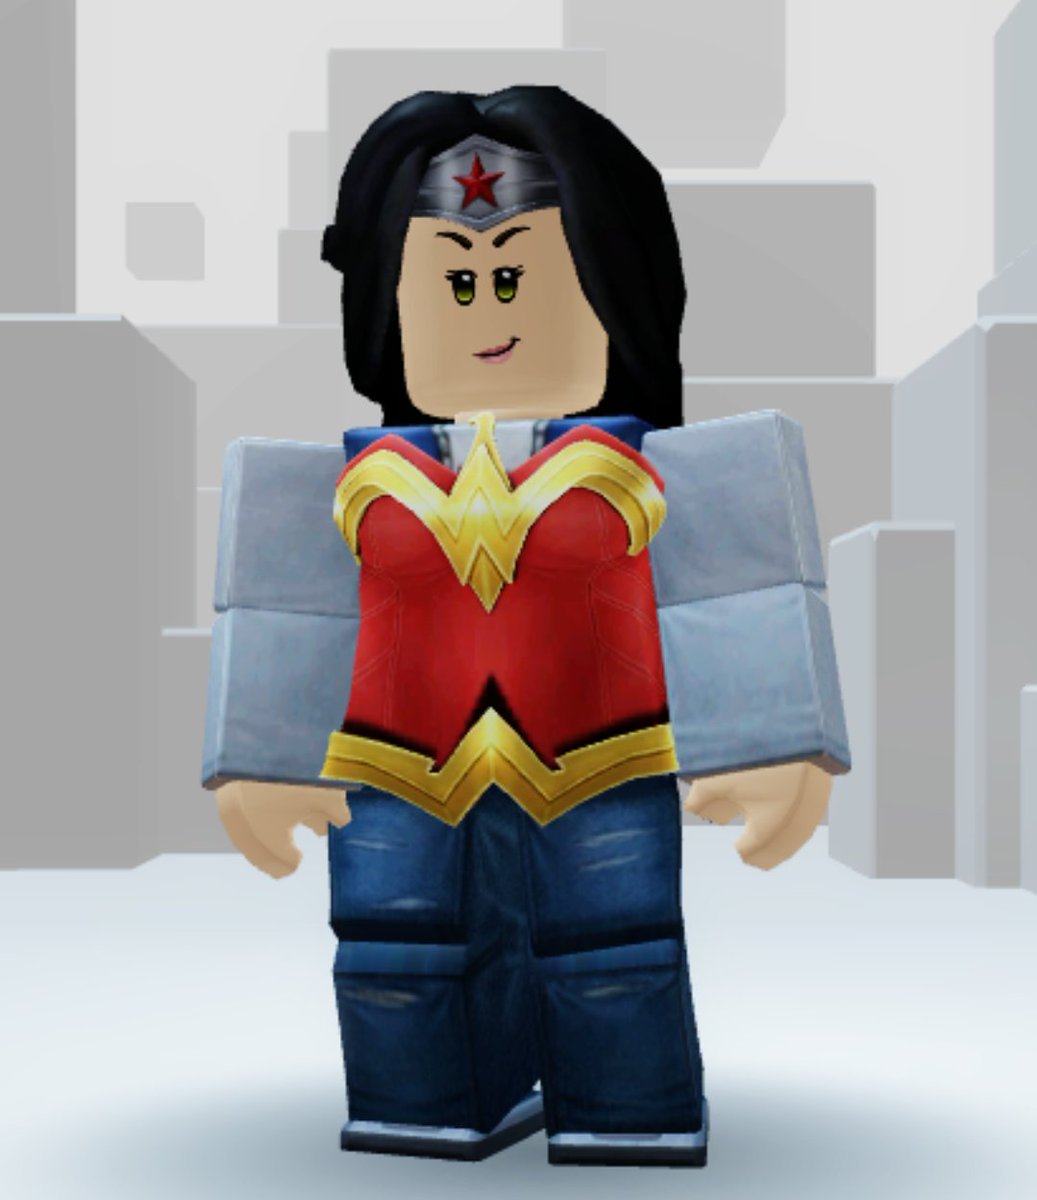 Lord Cowcow On Twitter Has The Mystery Of What Package Bundle The Wonder Woman Armour Accessories Work With Been Solved Yet - roblox female armor